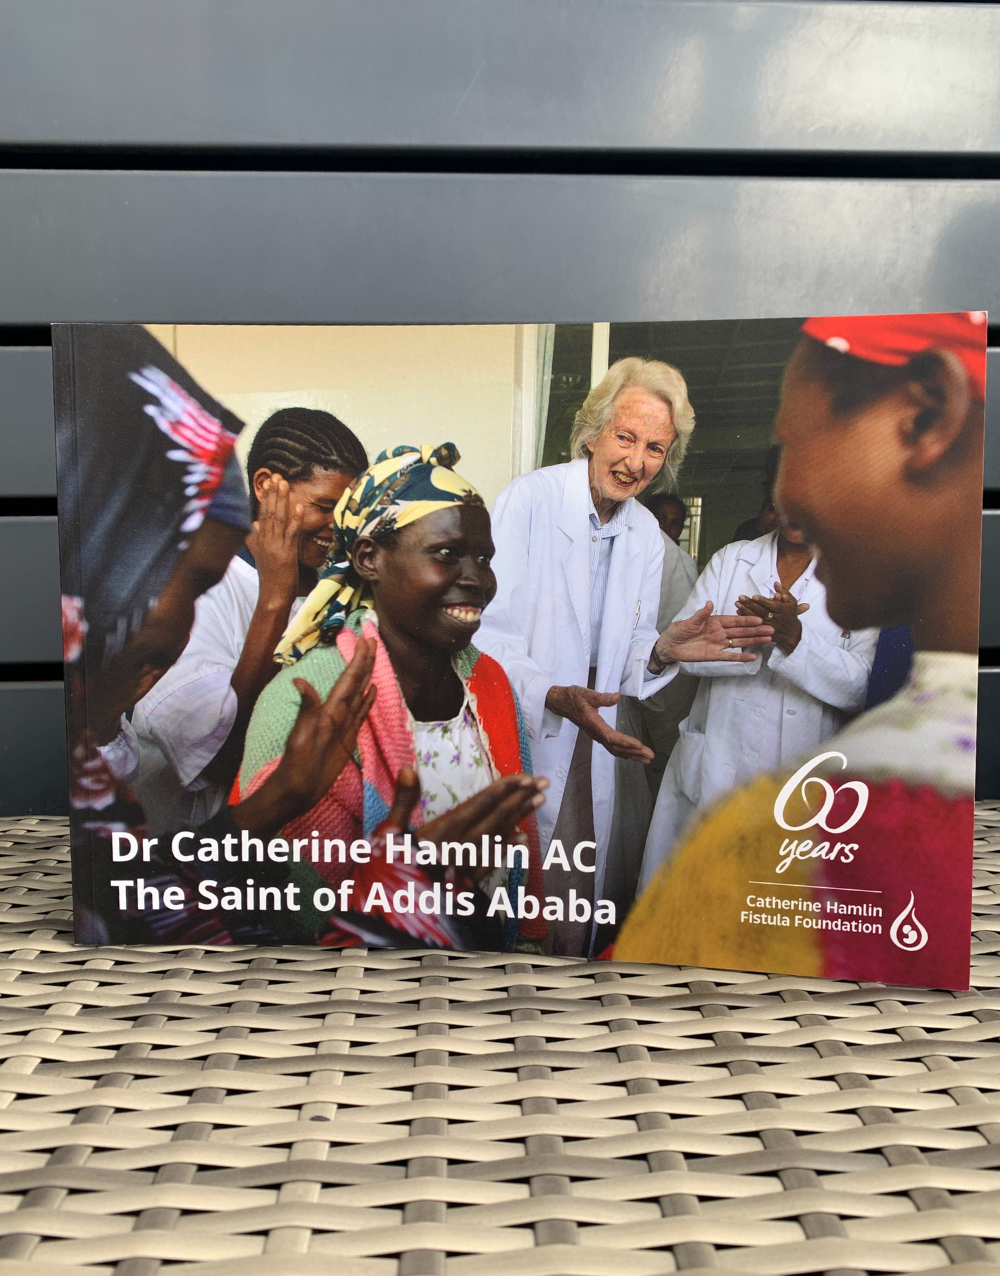 Limited Edition Full Colour Photography Book 'Dr Catherine Hamlin AC - The Saint of Addis Ababa'